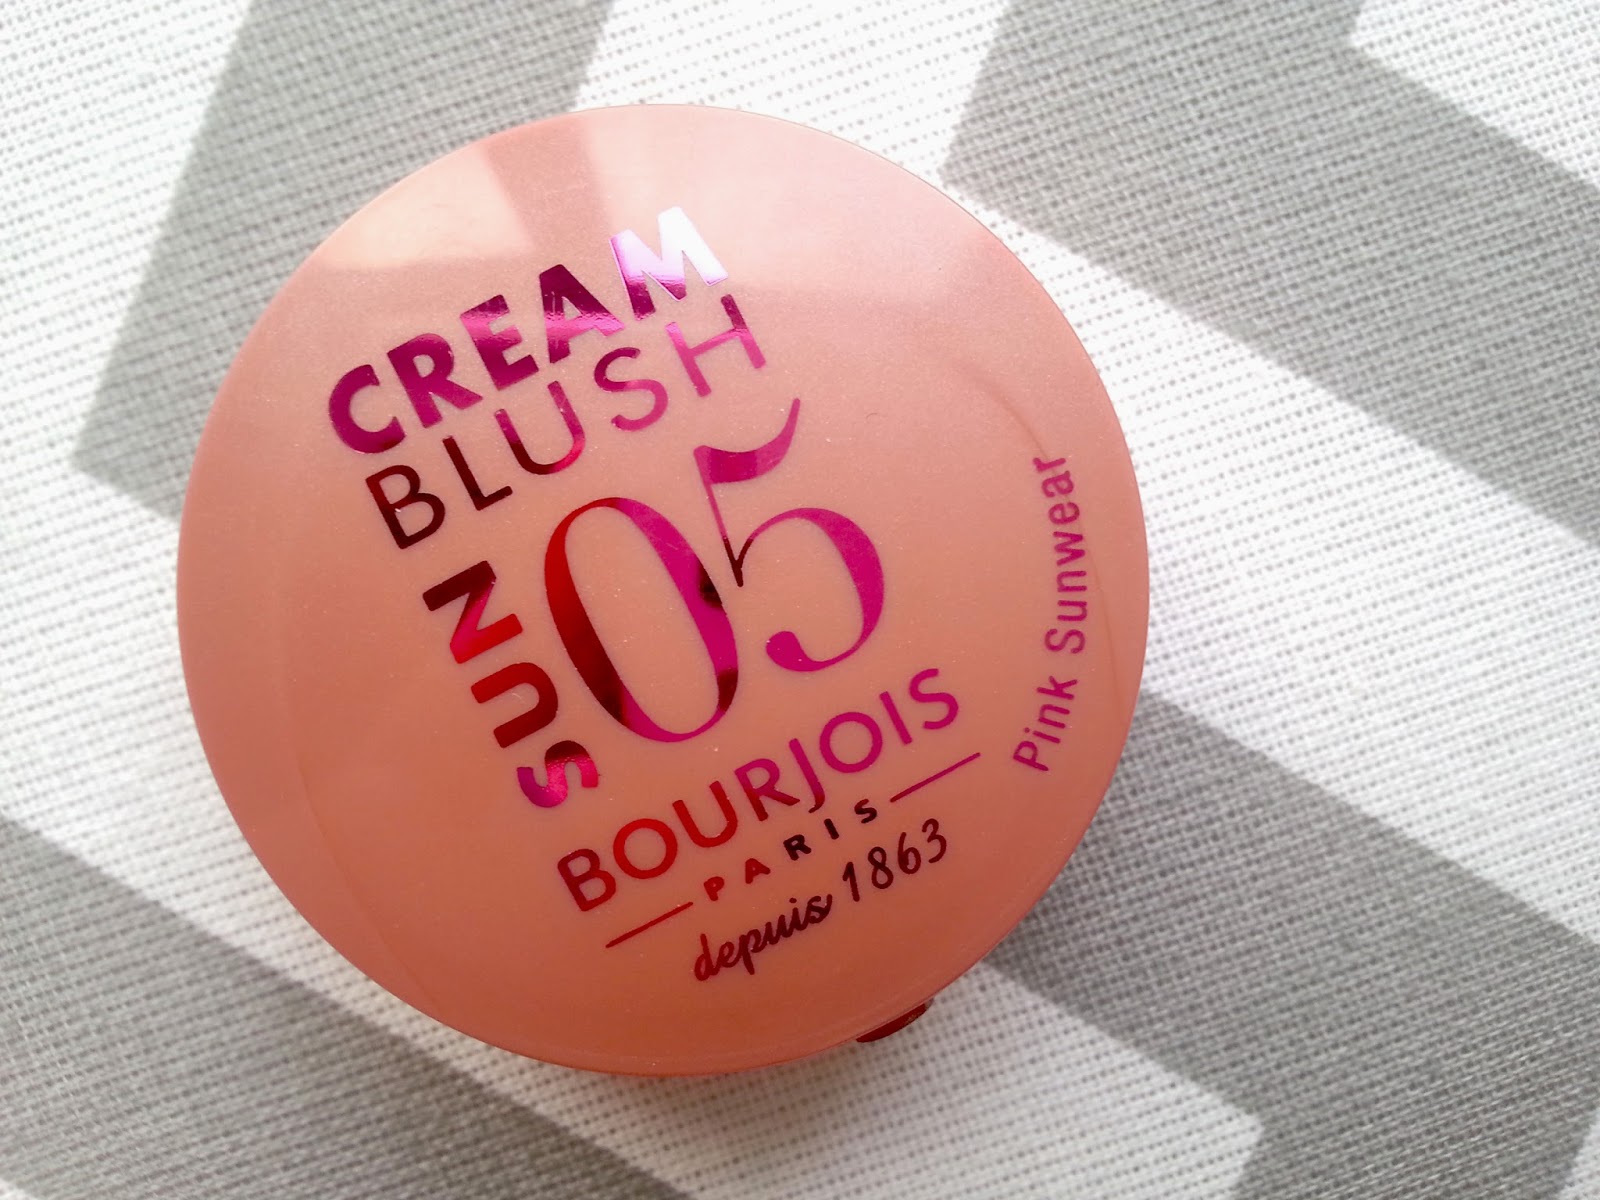 Bourjois Cream Blush in 05 Pink Sunwear Swatches and Review